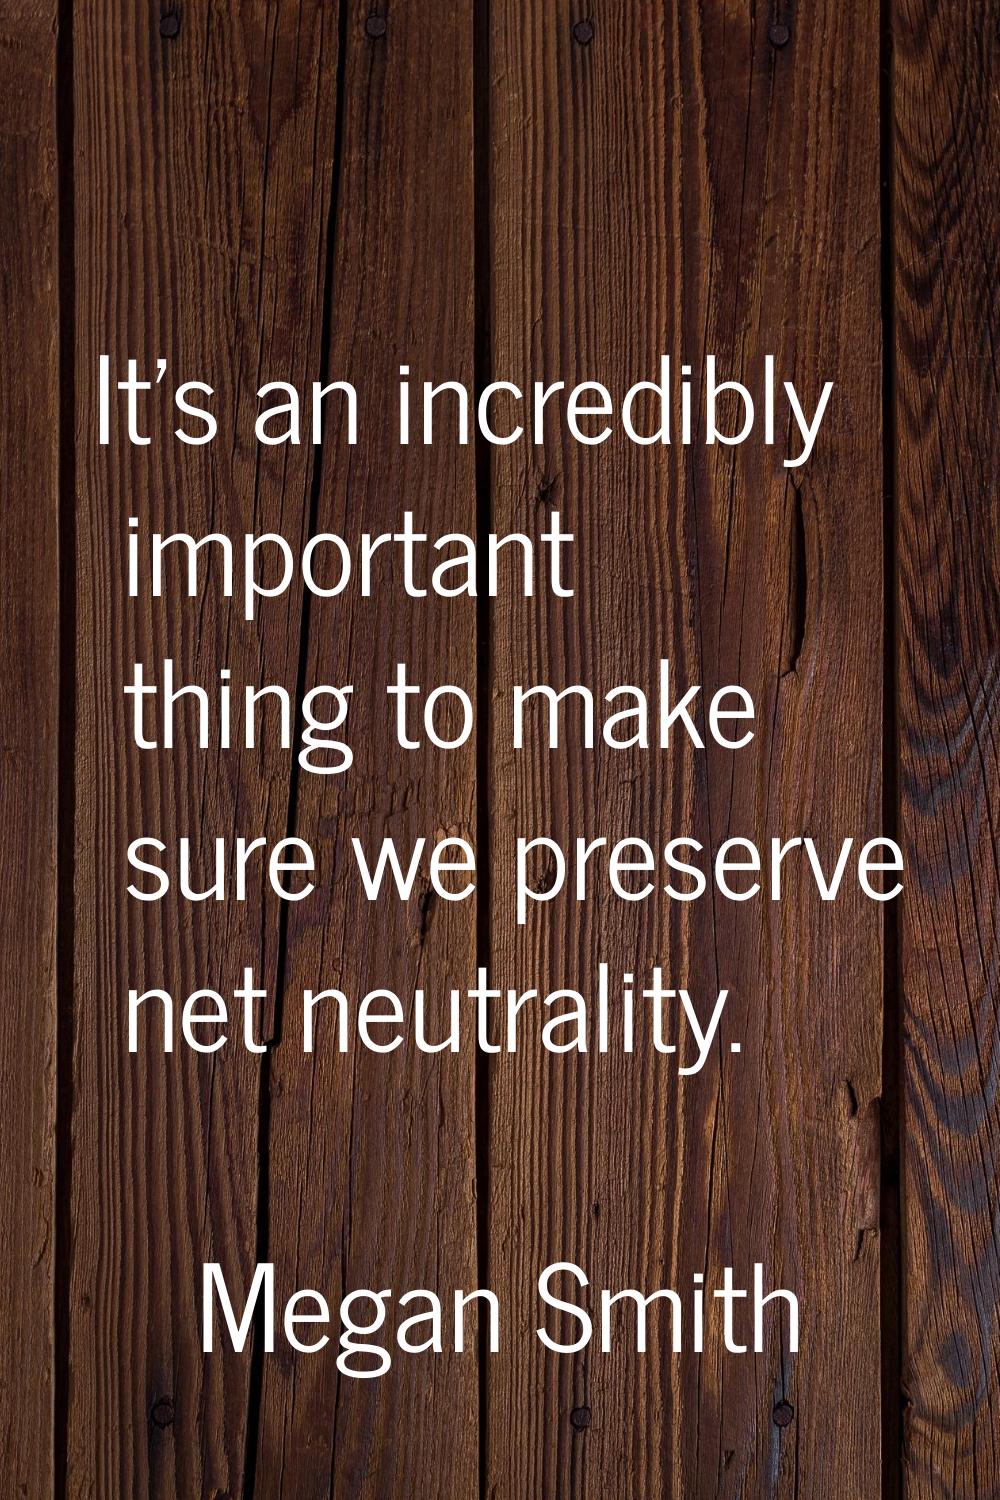 It's an incredibly important thing to make sure we preserve net neutrality.